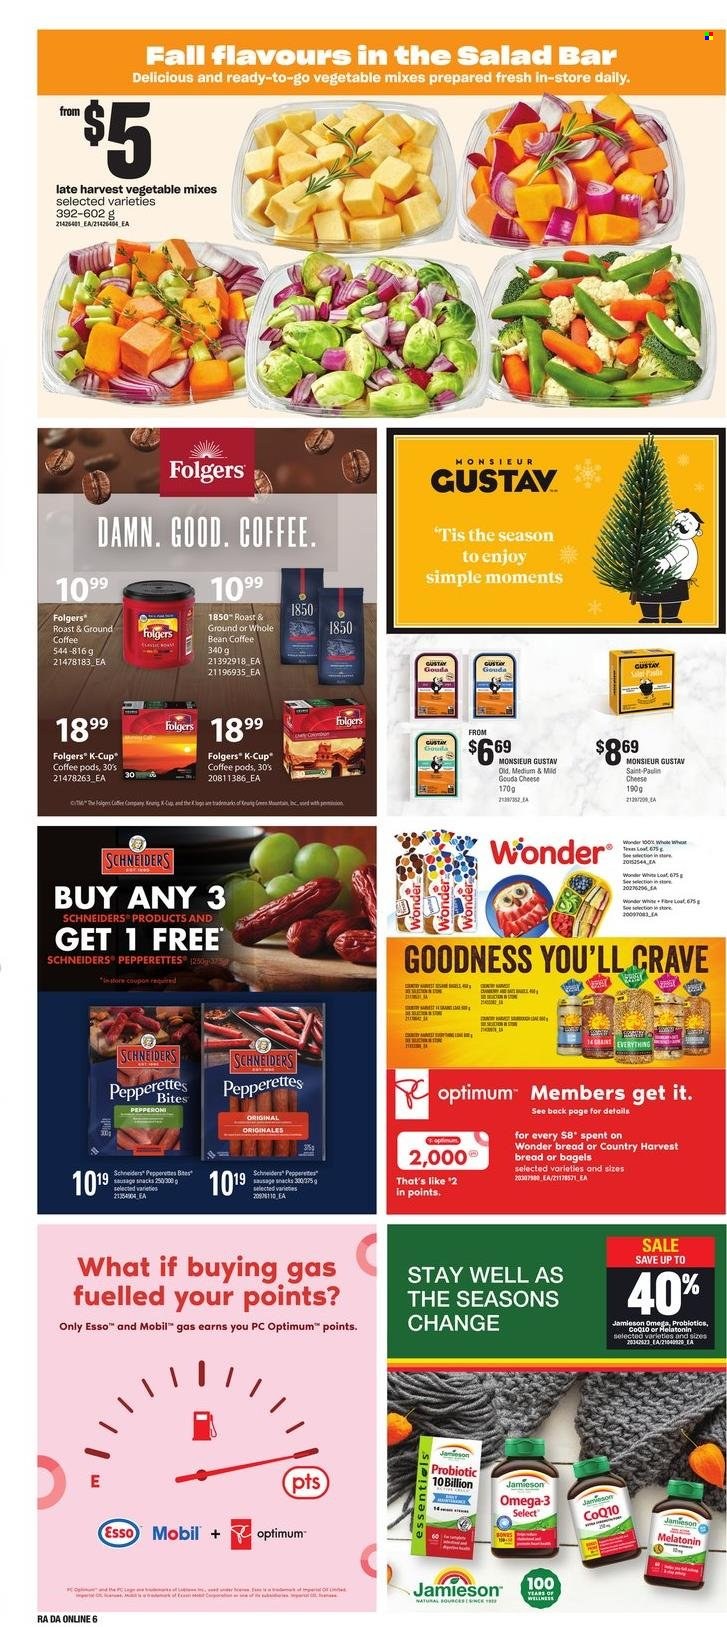 Dominion Flyer - November 24, 2022 - November 30, 2022 - Sales products - bagels, bread, salad, sausage, pepperoni, gouda, cheese, Country Harvest, snack, coffee pods, Folgers, ground coffee, coffee capsules, K-Cups, Keurig, Green Mountain, Optimum, Moments, Mobil, Melatonin, probiotics, Omega-3. Page 15.